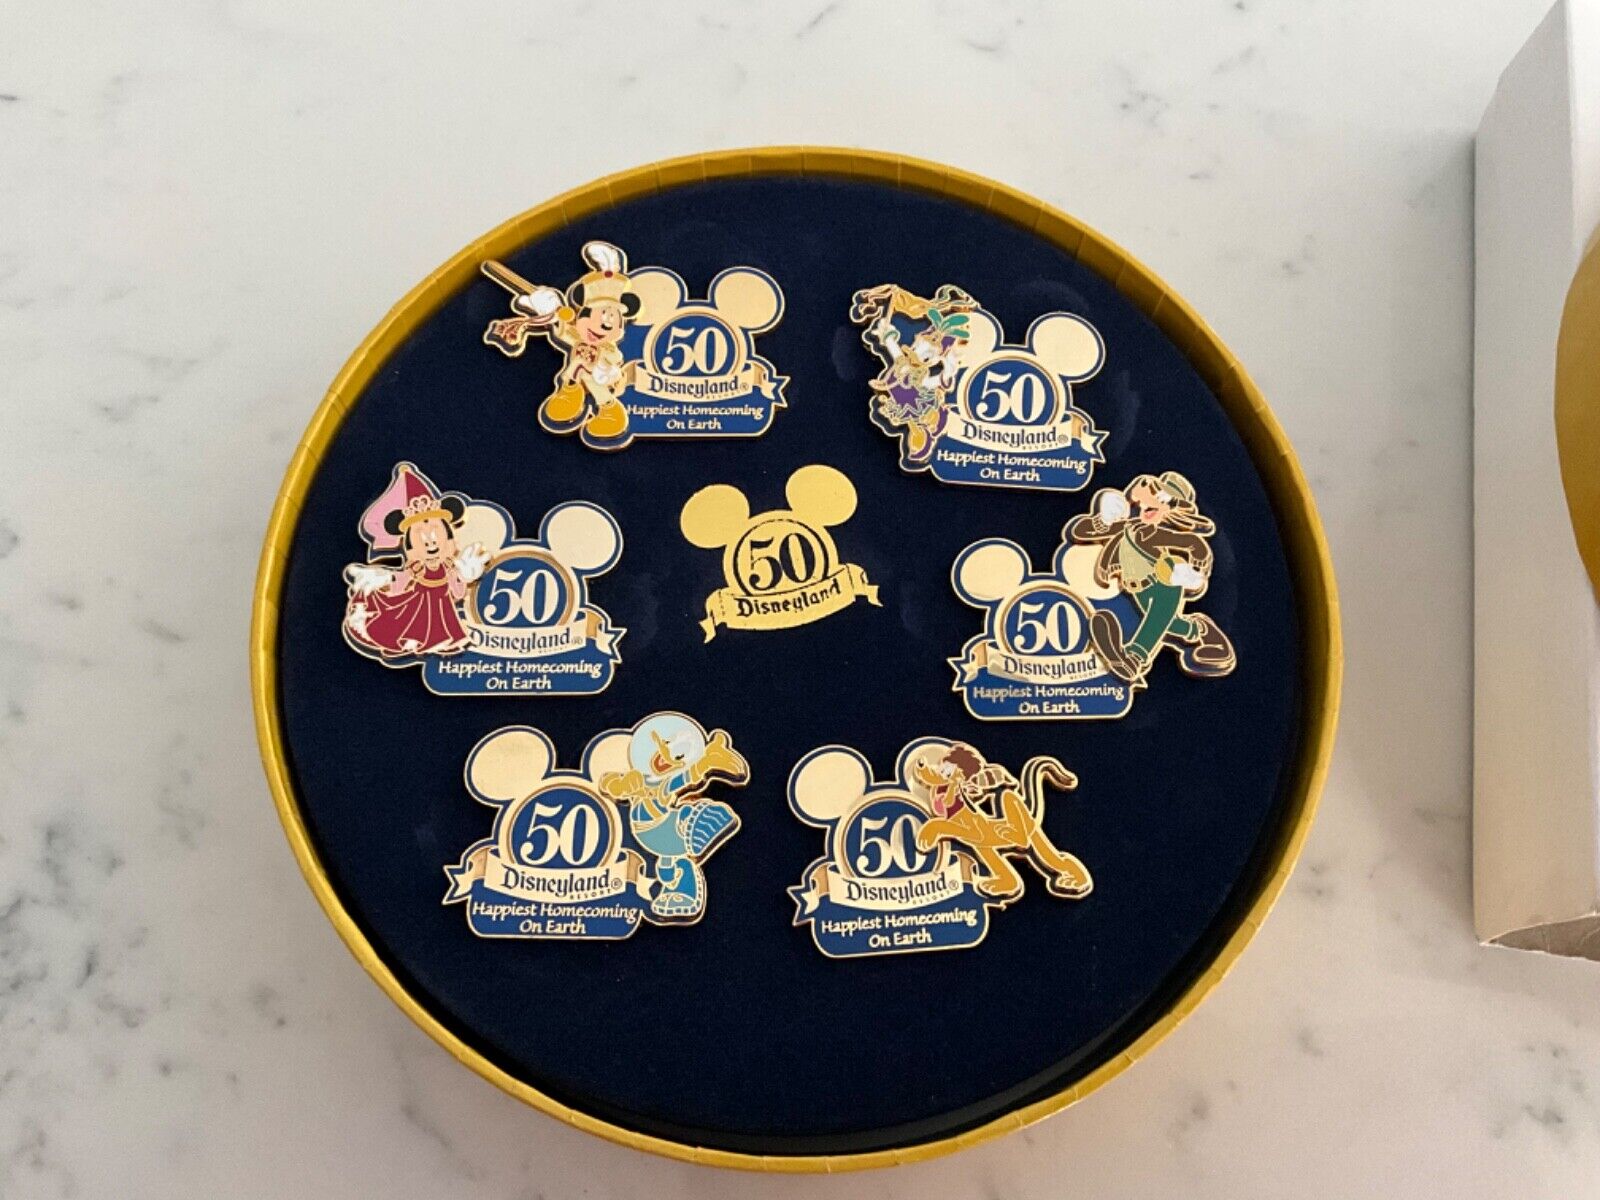 Disneyland 50th Anniversary Happiest Homecoming On Earth Pins - New